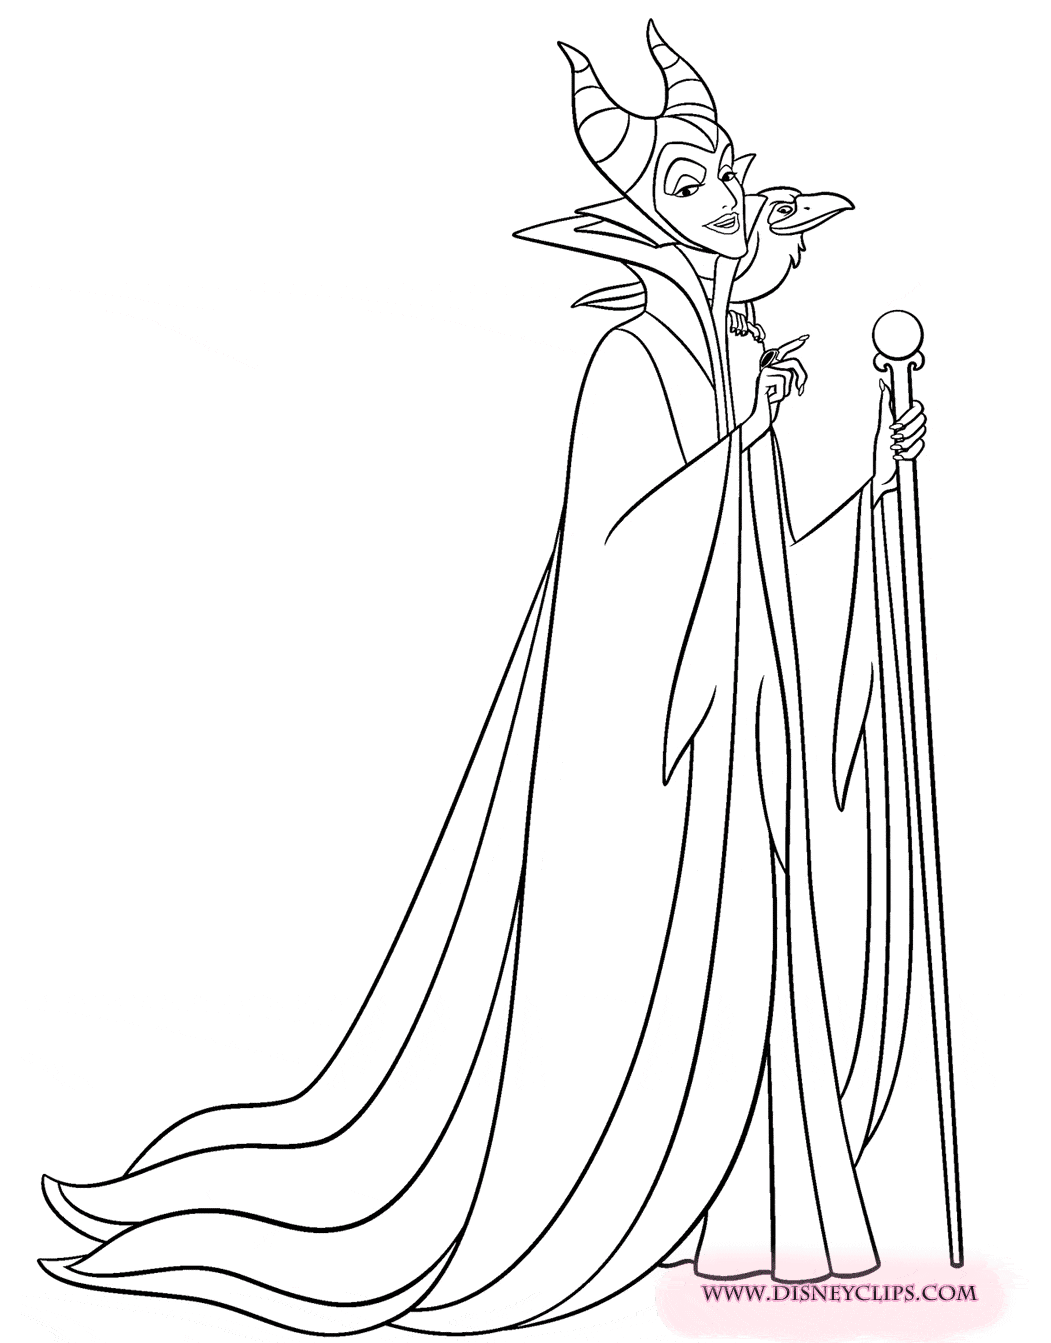 maleficent easy coloring pages - photo #28